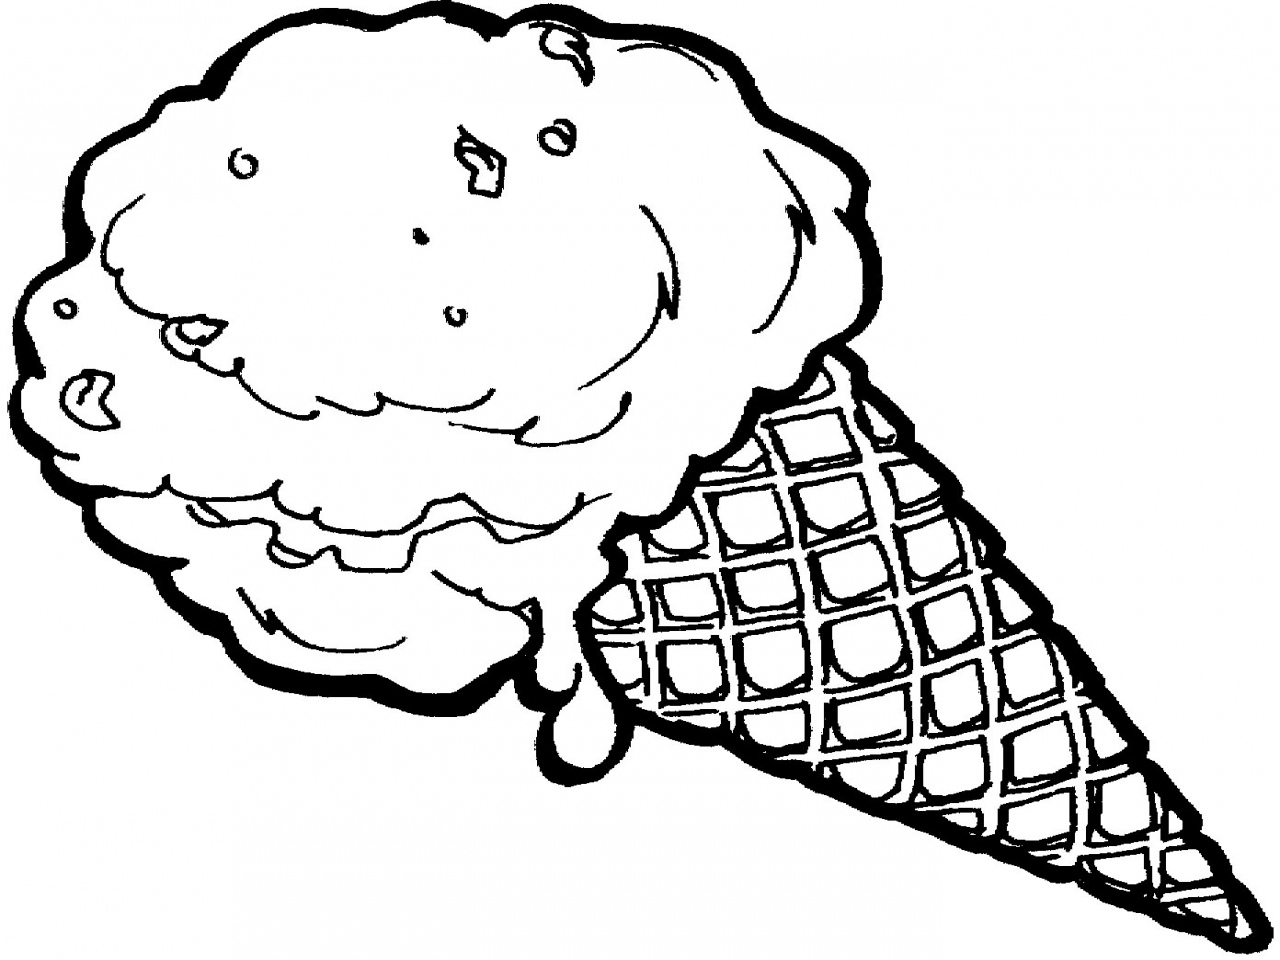 Scoop Ice Cream Coloring Page (Page 1) - Line.17QQ.com